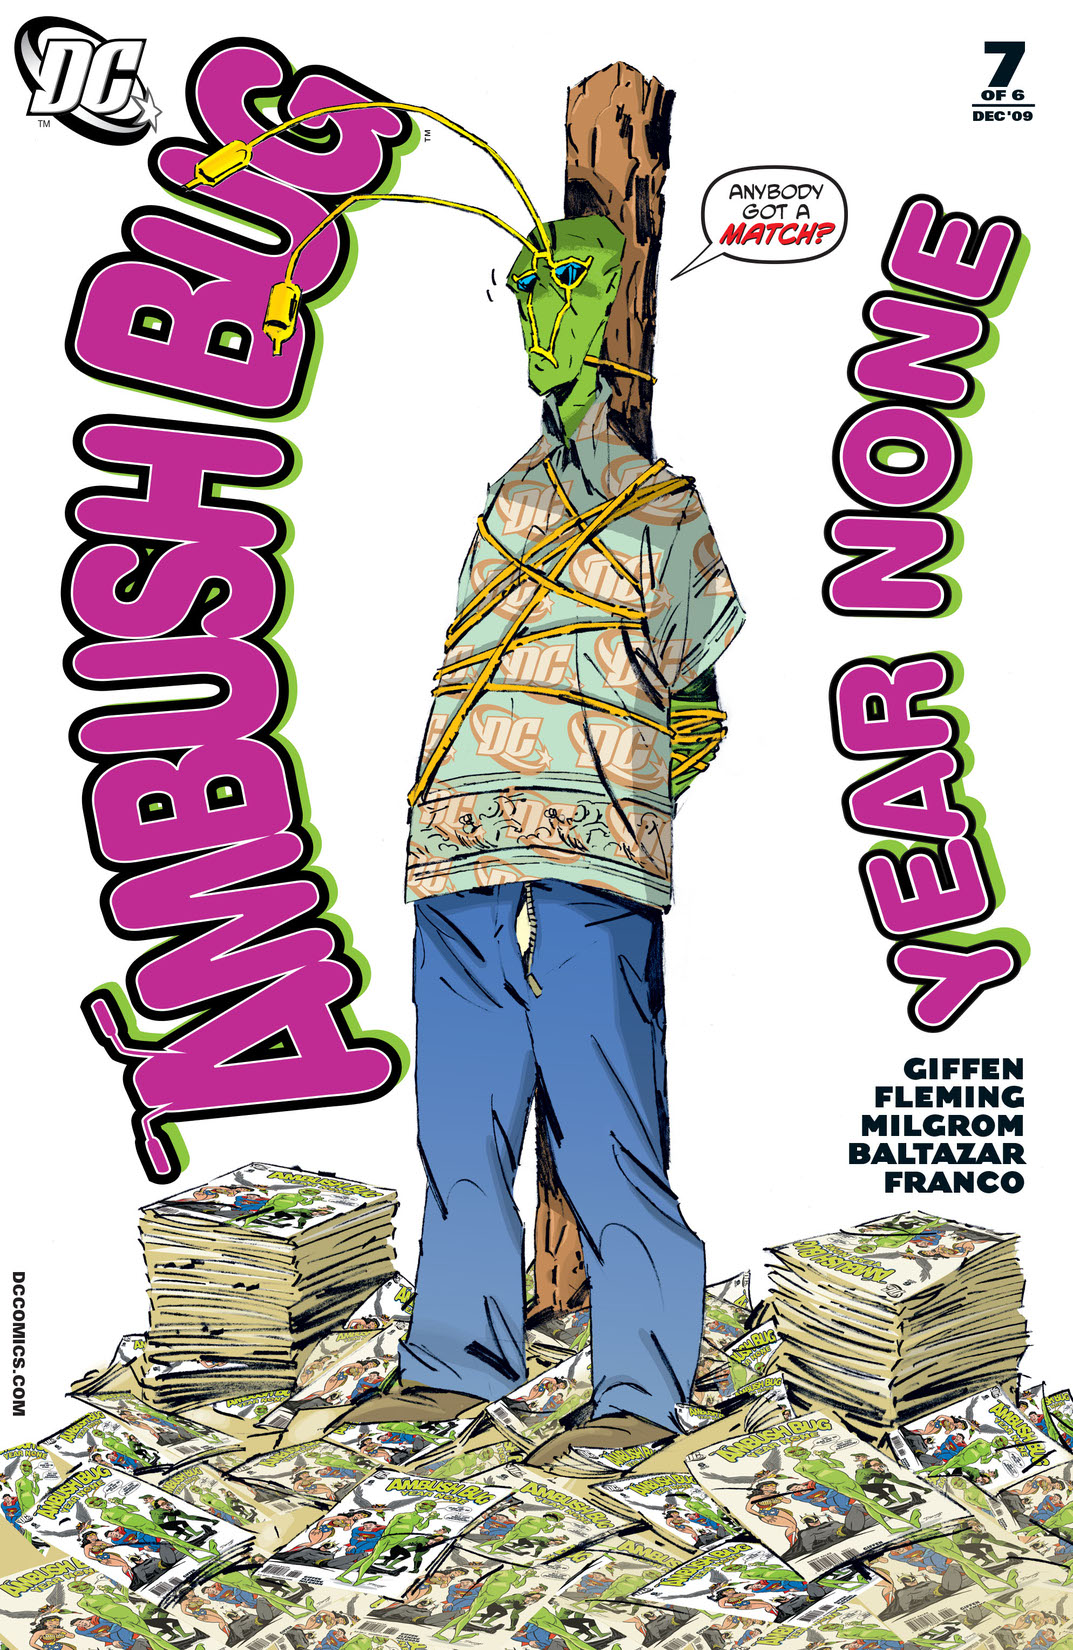 Ambush Bug: Year None #7 preview images